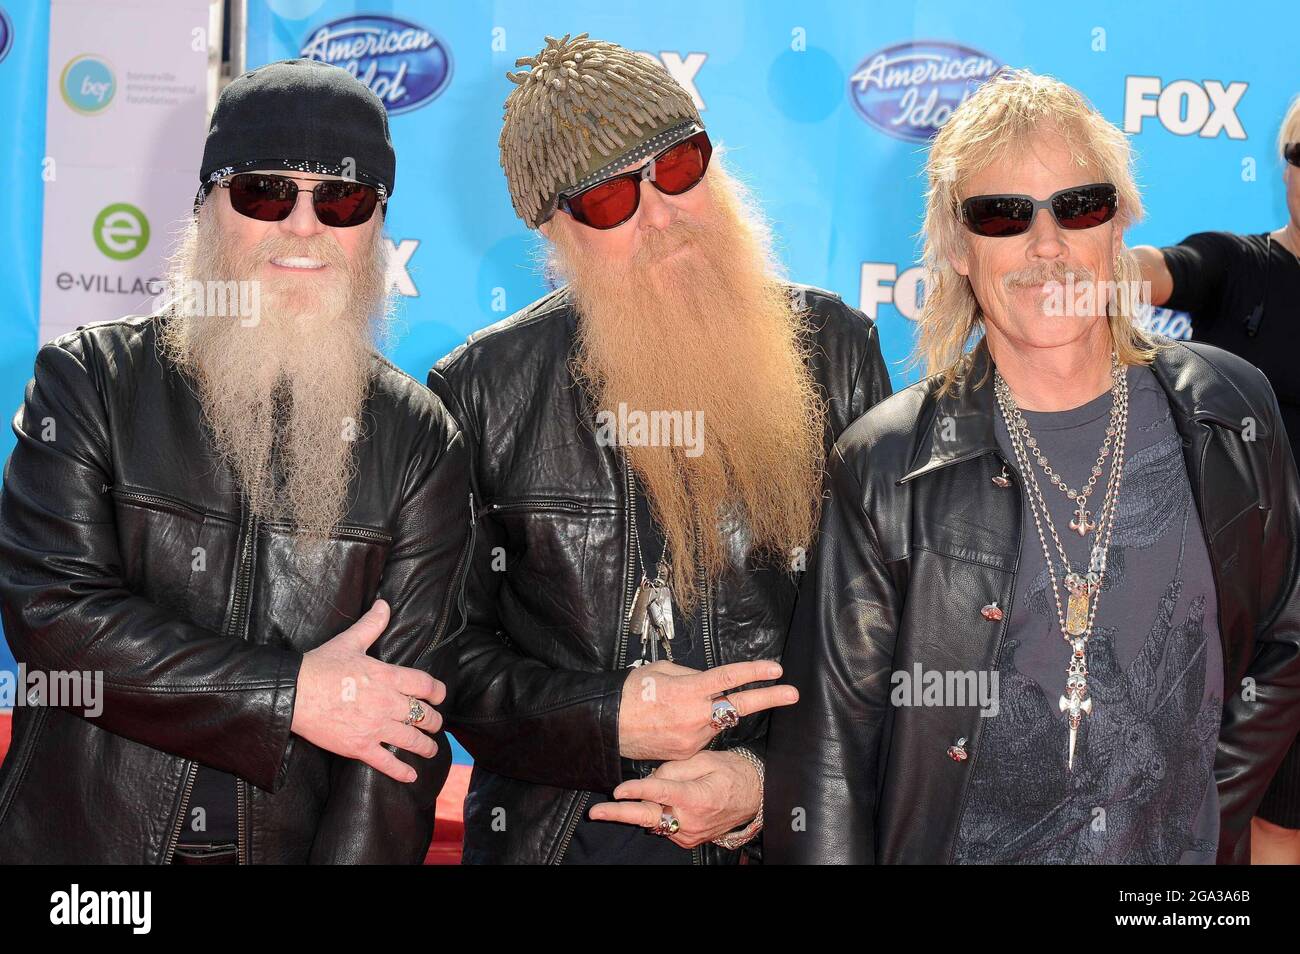 Los Angeles, USA. 21st May, 2008. Dusty Hill, John Cusimano and Billy F. Gibbons of ZZ Top. 21 May 2008 - Los Angeles, California. American Idol 2008 Grand Finale - Arrivals at the Nokia Theatre. Photo Credit: Giulio Marcocchi/Sipa Press. /Idol gm.065/0805220941 Credit: Sipa USA/Alamy Live News Stock Photo